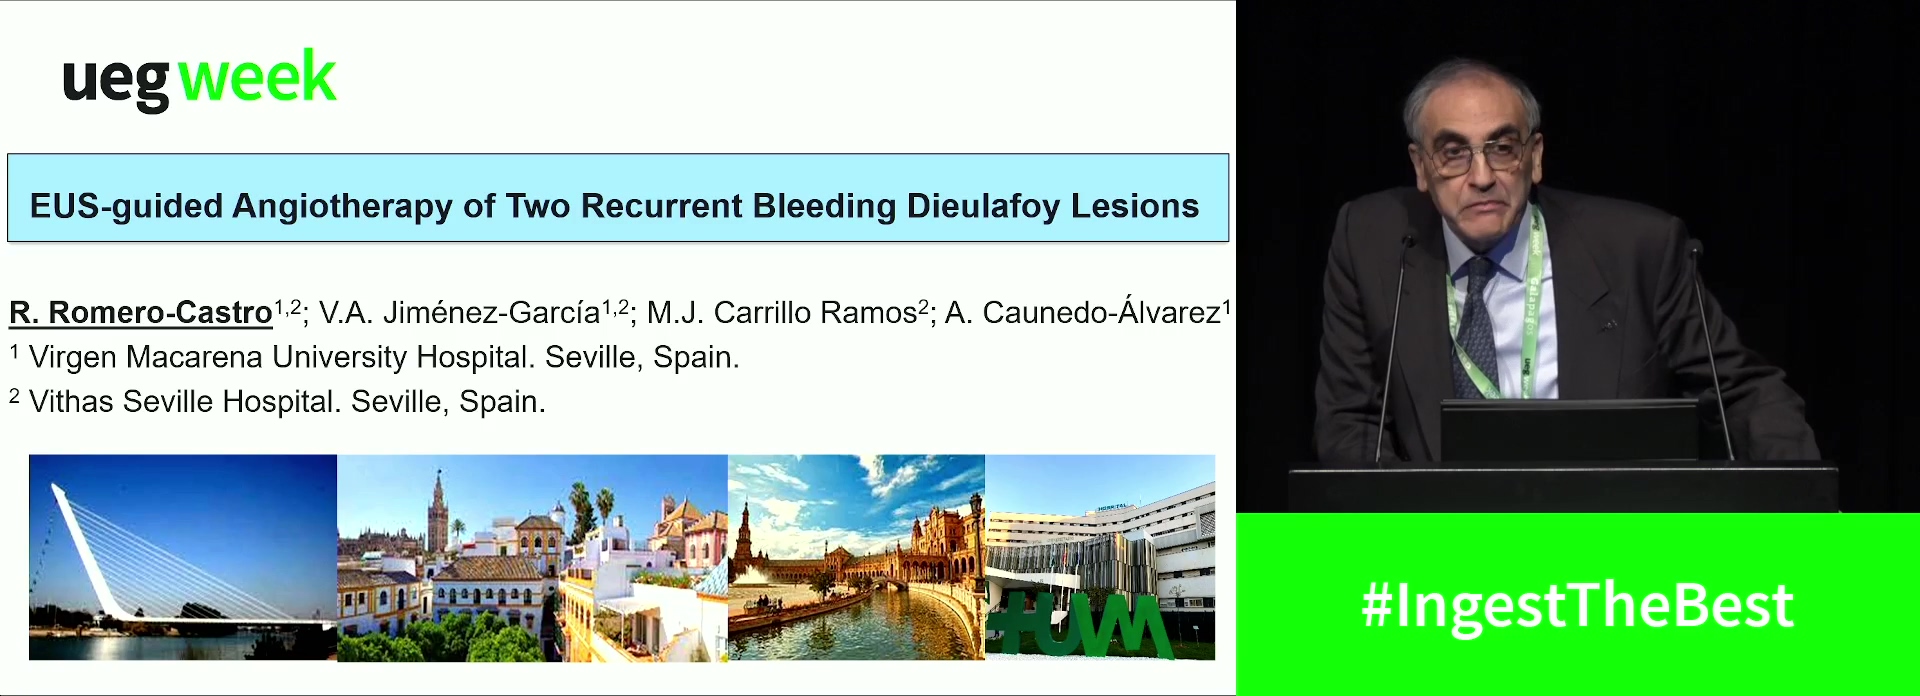 EUS-GUIDED ANGIOTHERAPY OF TWO RECURRENT BLEEDING DIEULAFOY LESIONS